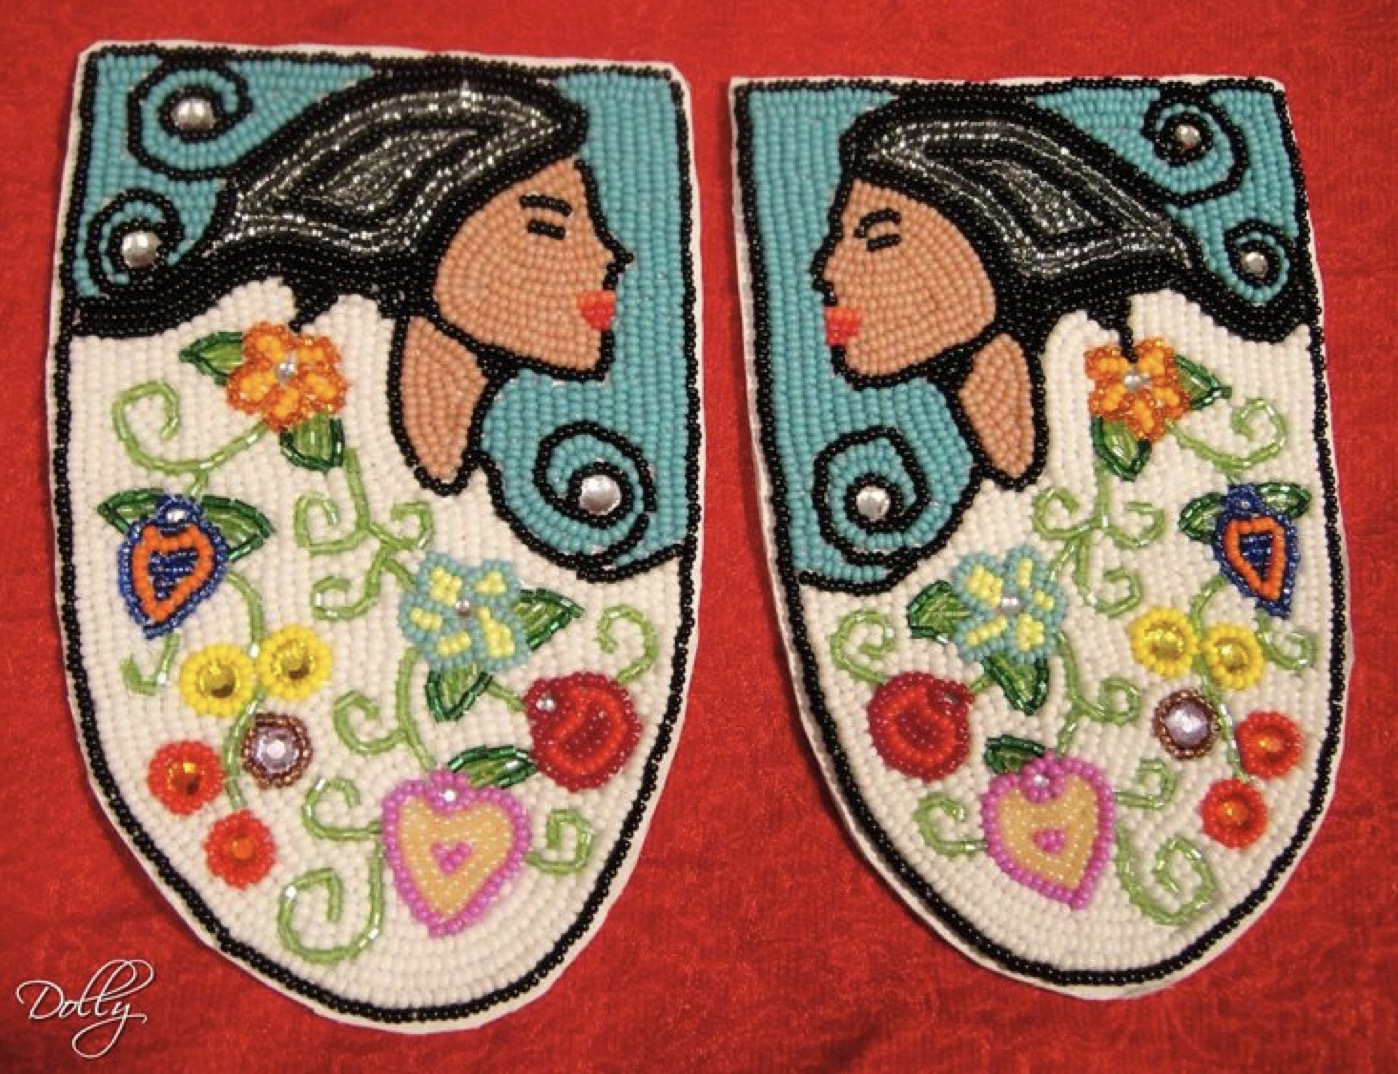 Native American Embroidery Patterns Native Design In Modern Fashion The Transformations Of Native